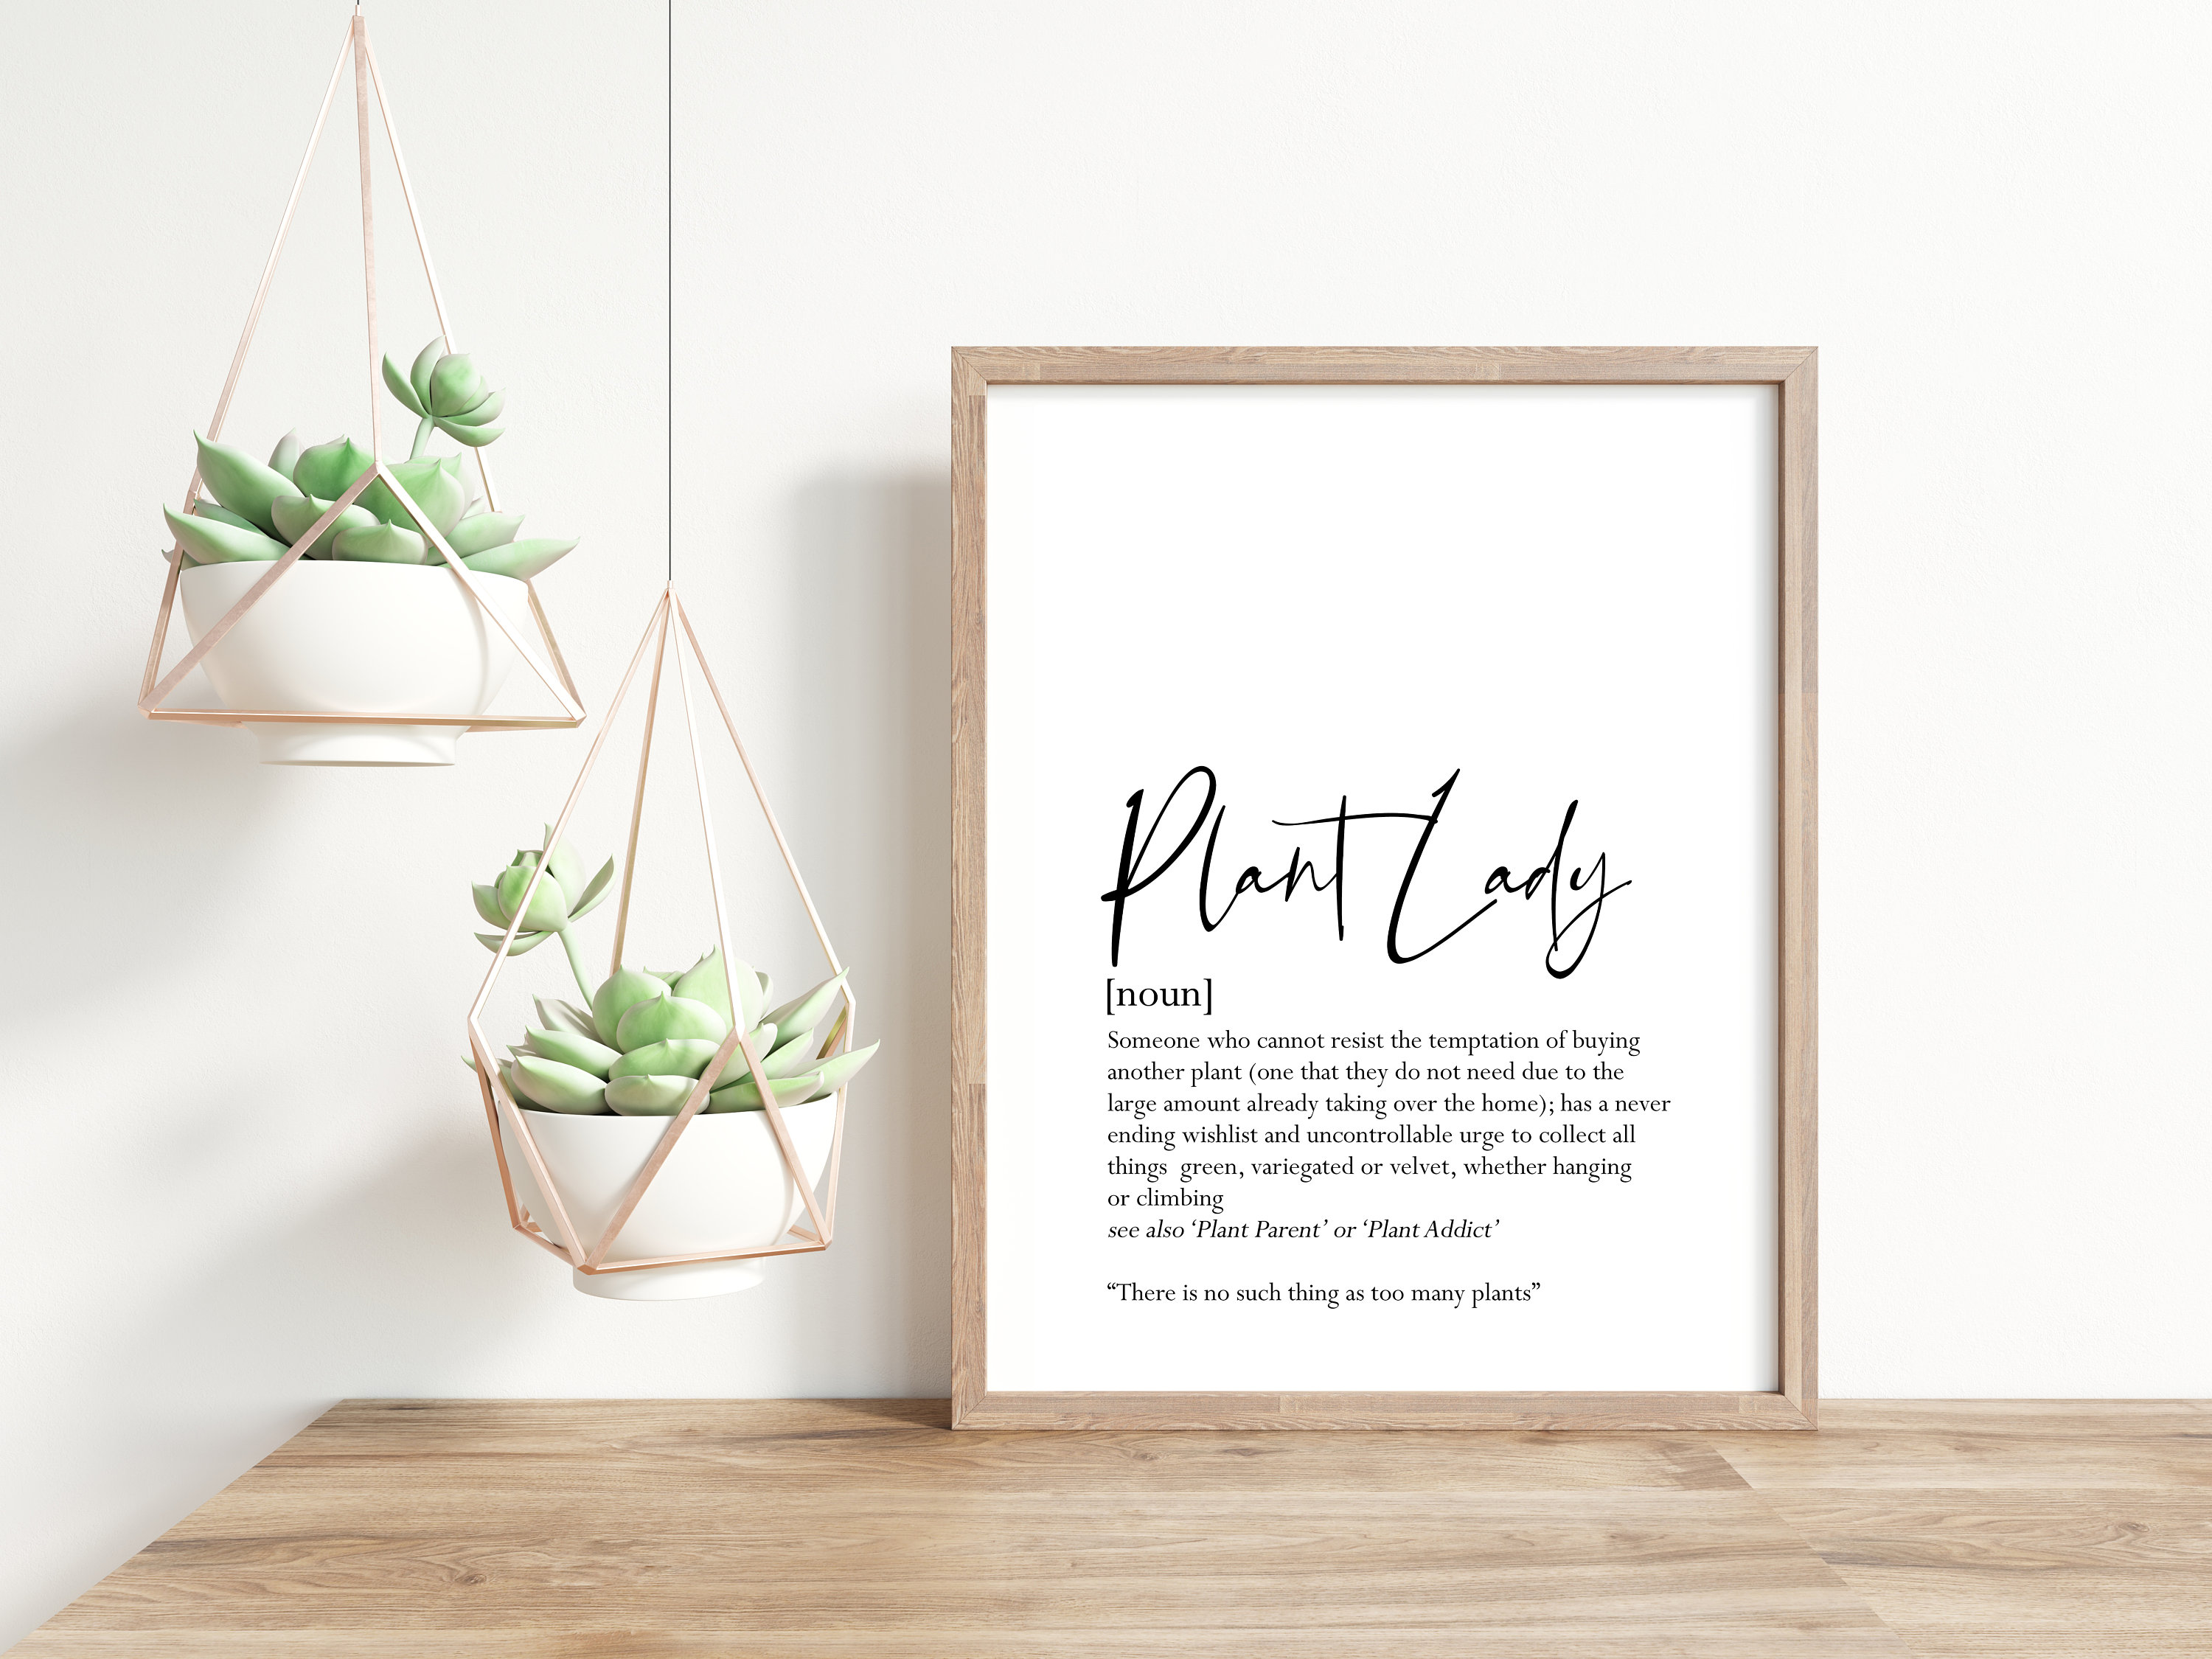 18. "Plant Lady" Poster